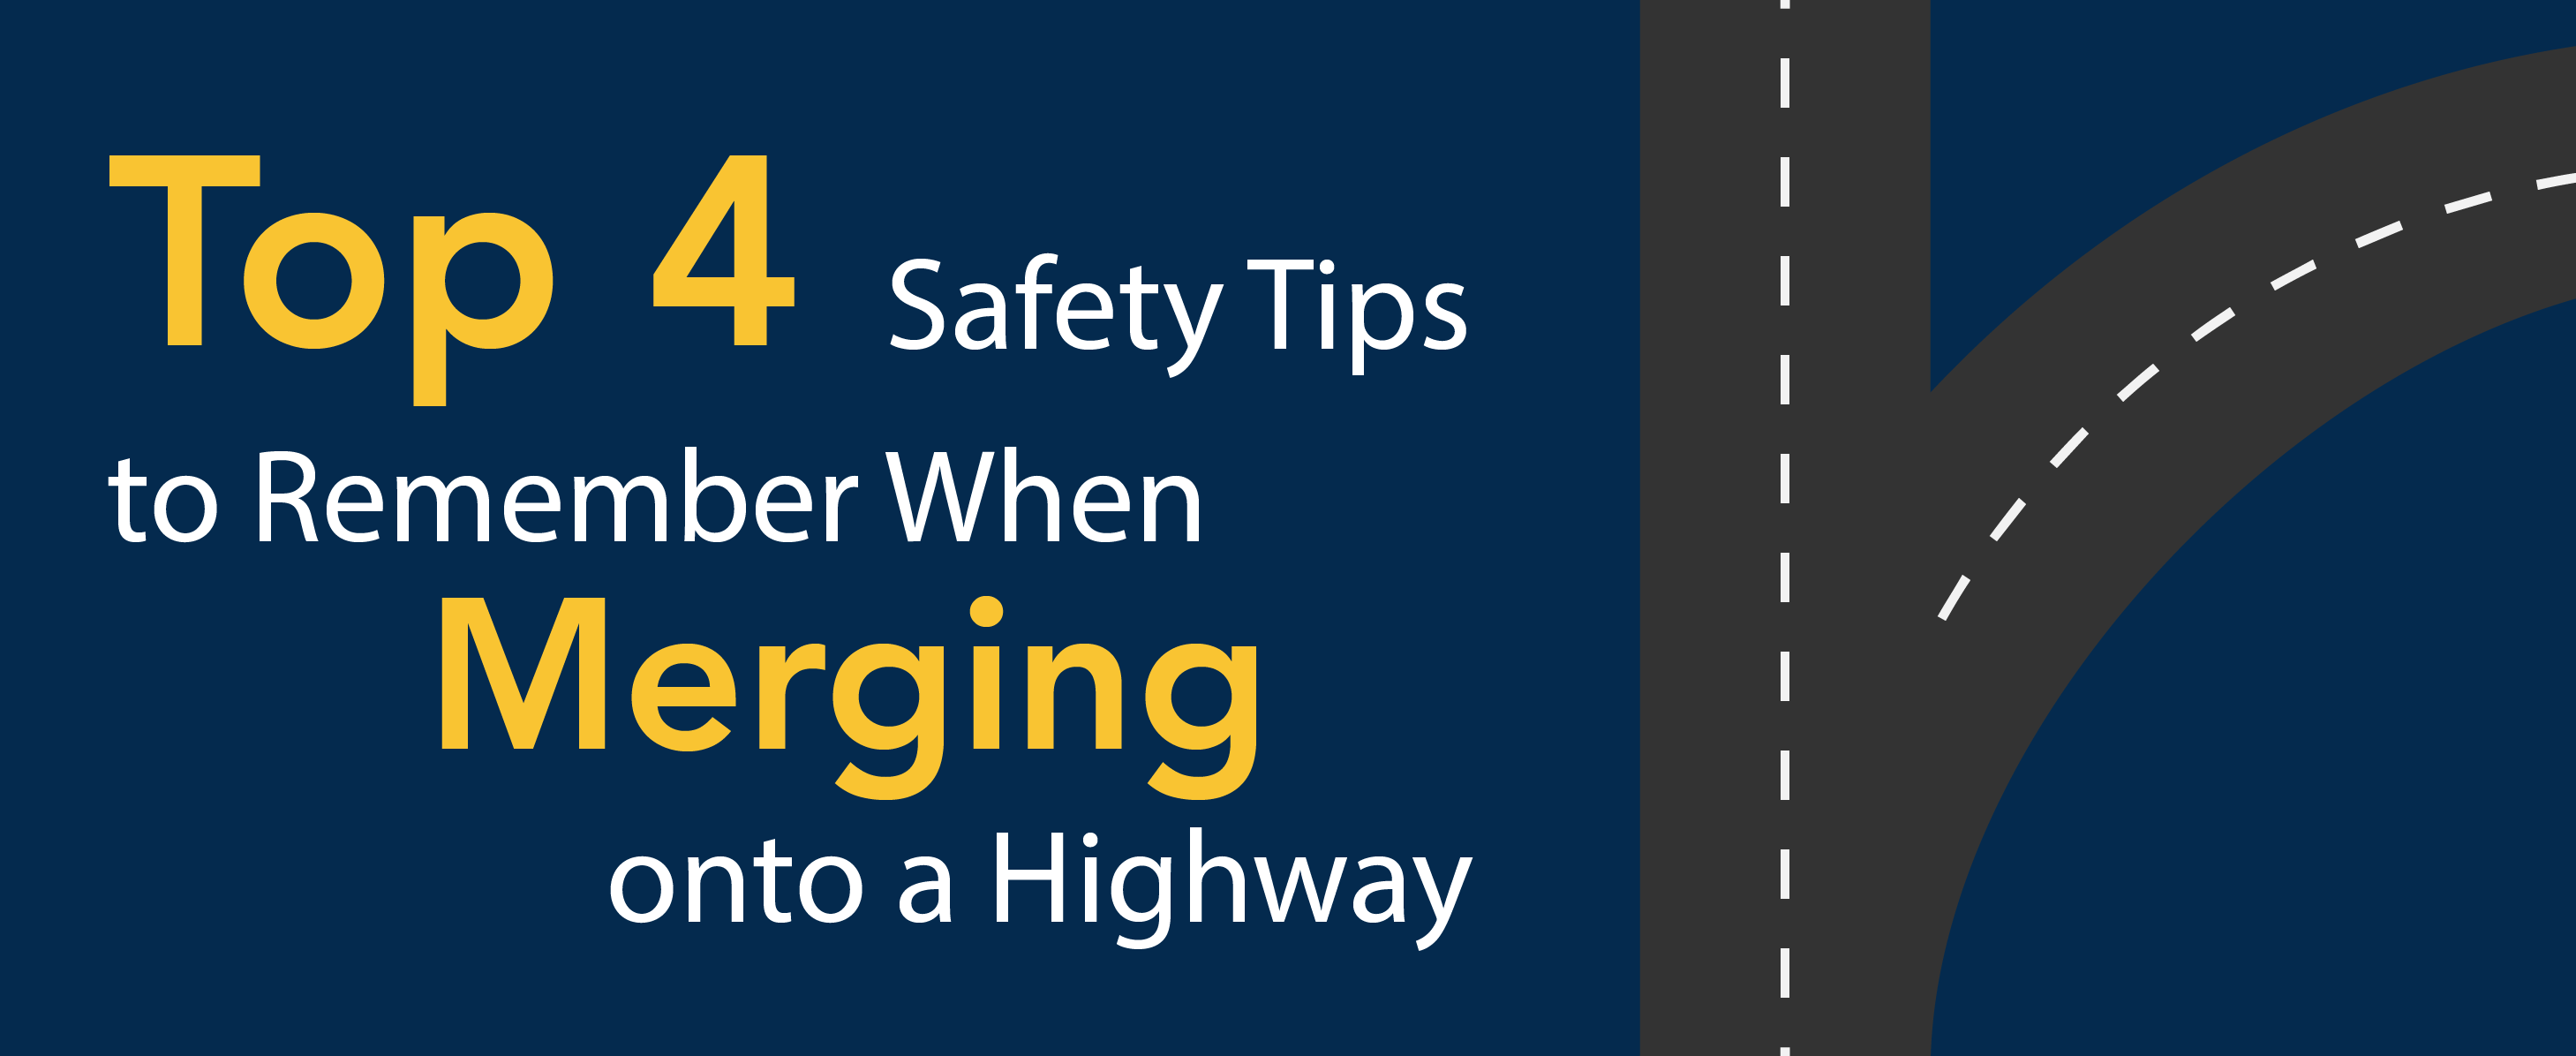 Top 4 safety tips to remember when merging onto a highway